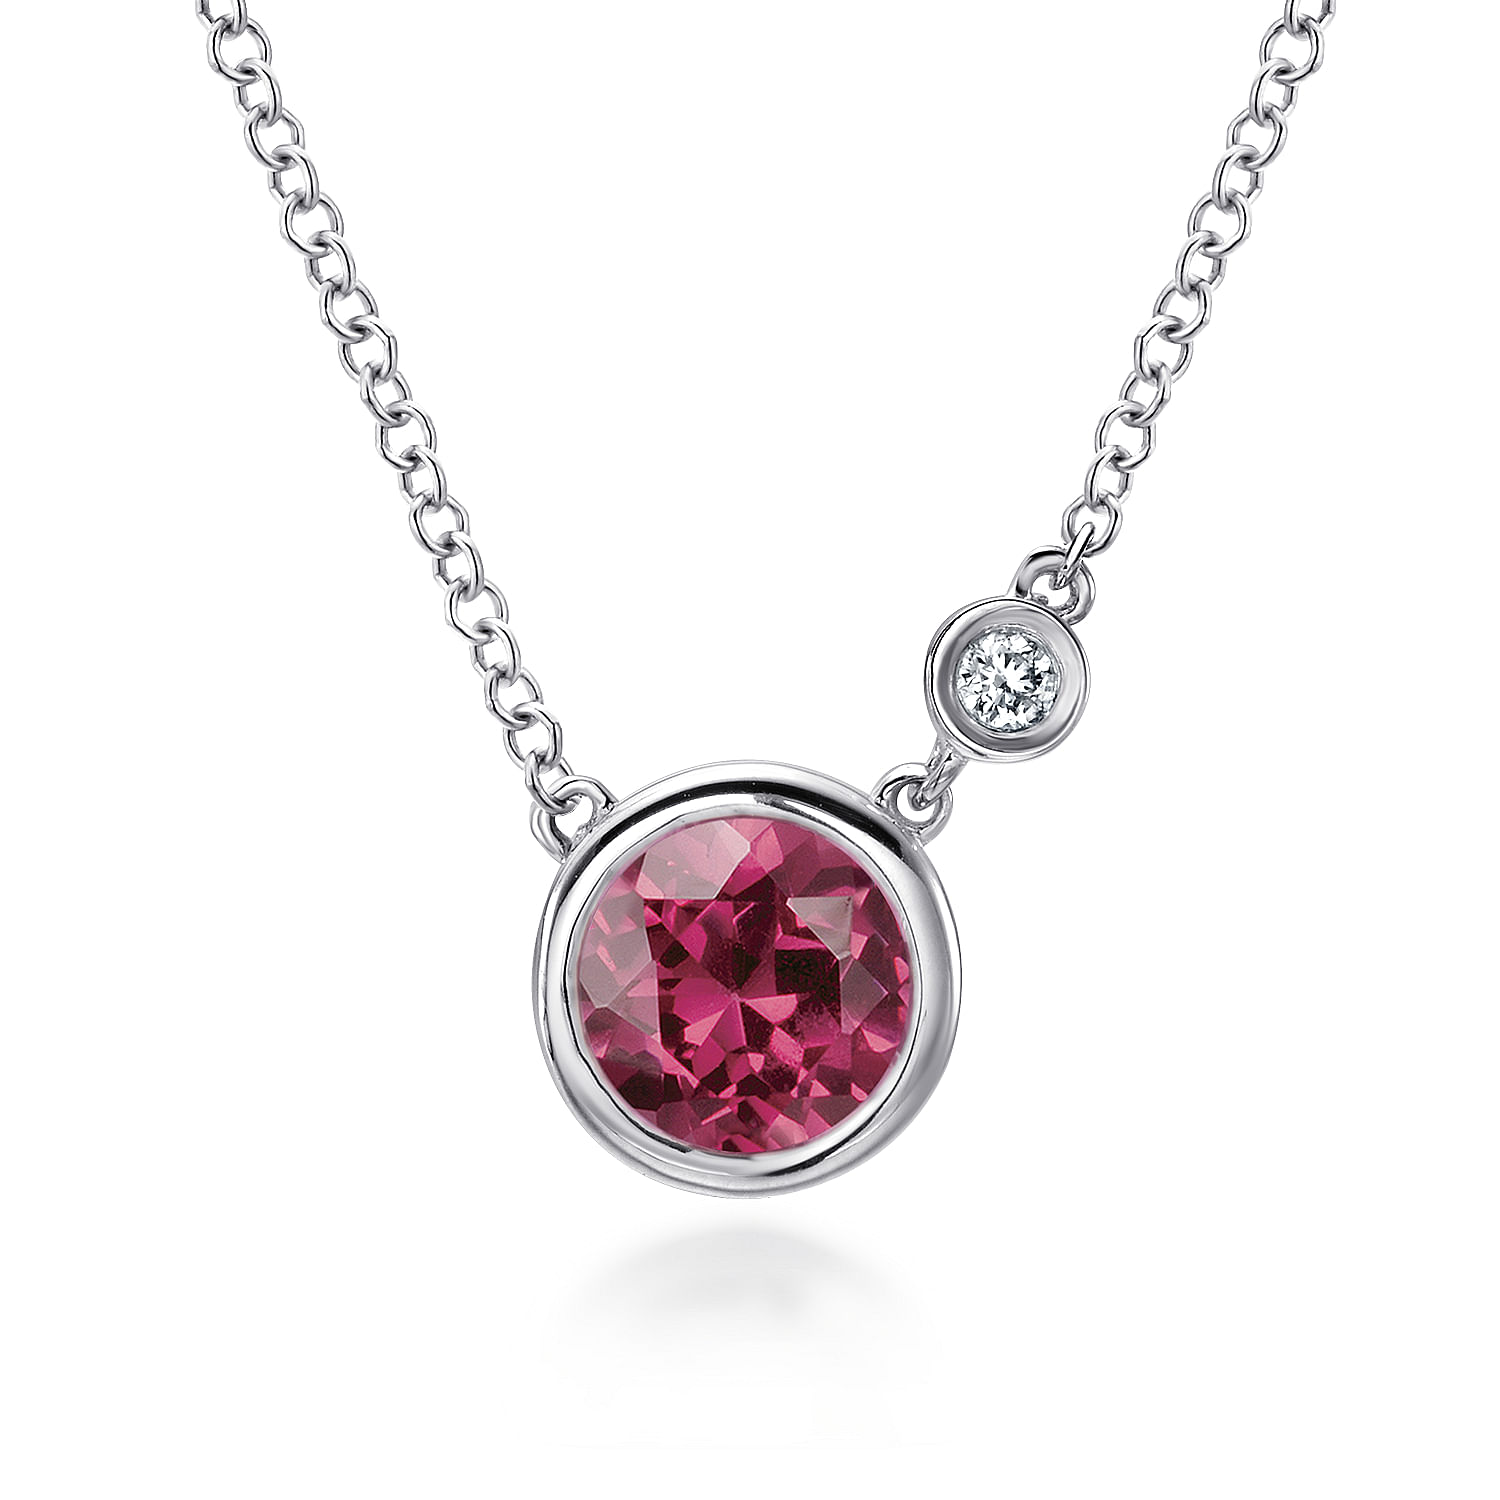 Gabriel - 925 Sterling Silver Pink Tourmaline and Diamond Pendant Necklace 